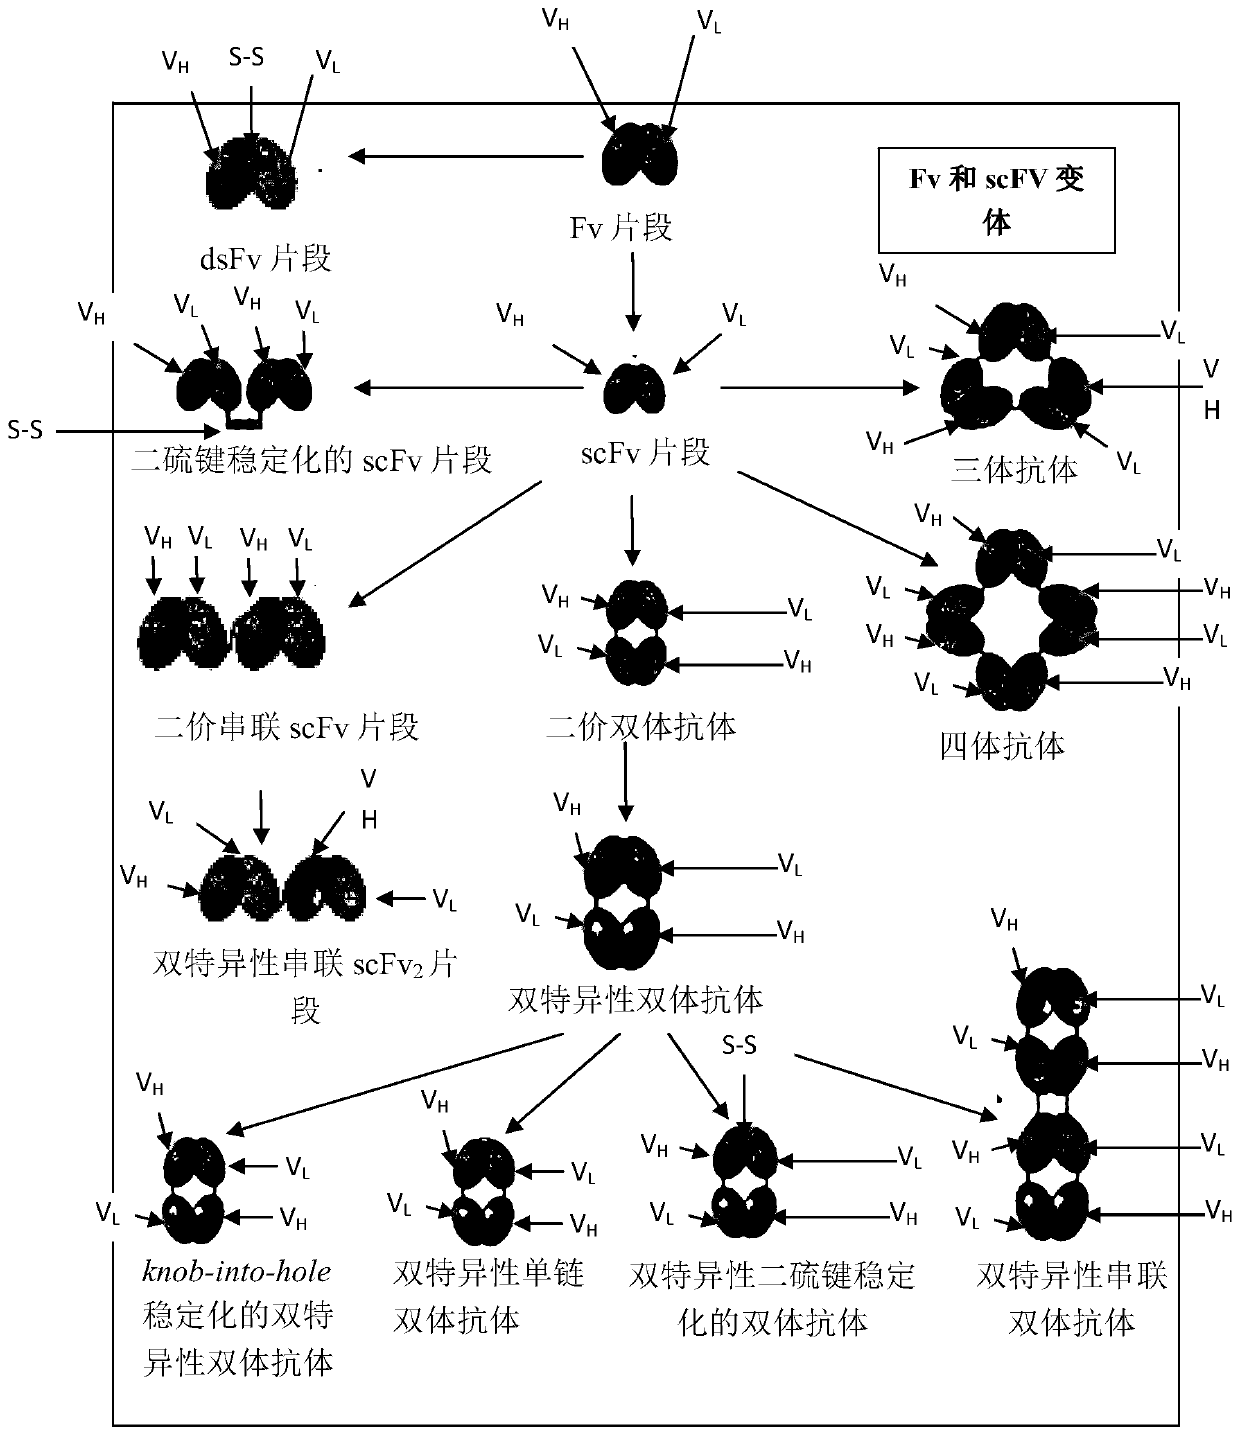 Anti-adrenomedullin (ADM) antibody or Anti-adm antibody fragment or Anti-adm non-ig scaffold for use in intervention and therapy of congestion in a patient in need thereof